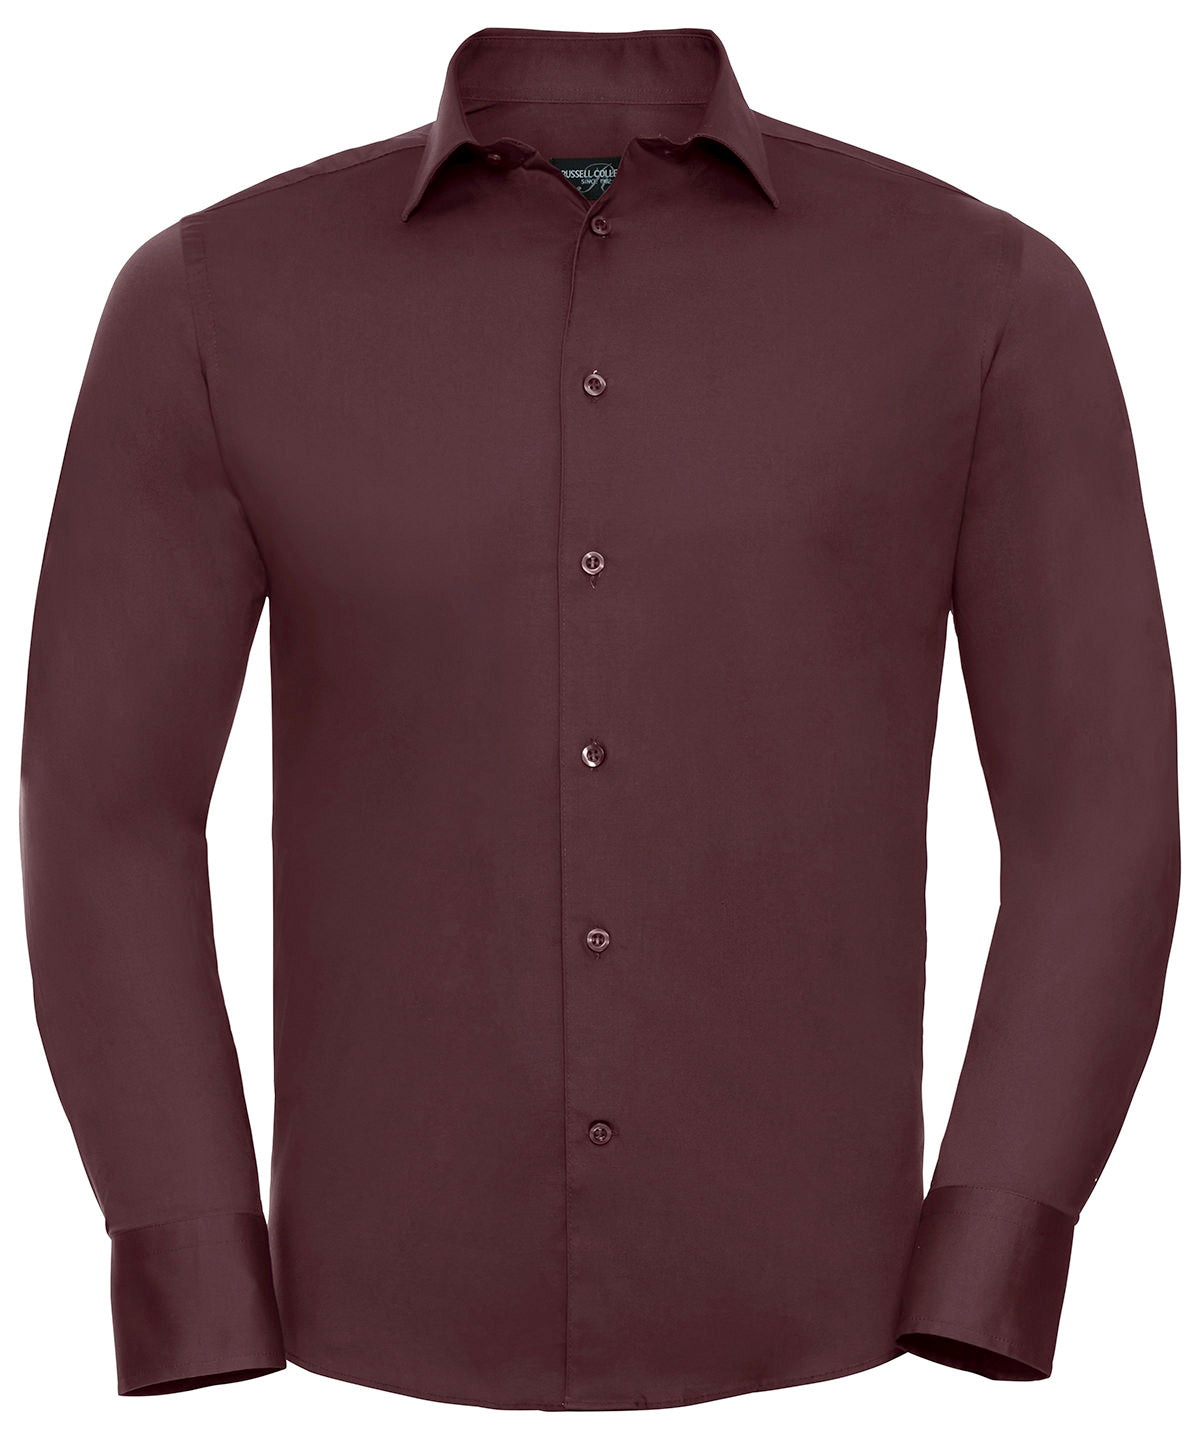 Long sleeve easycare fitted shirt